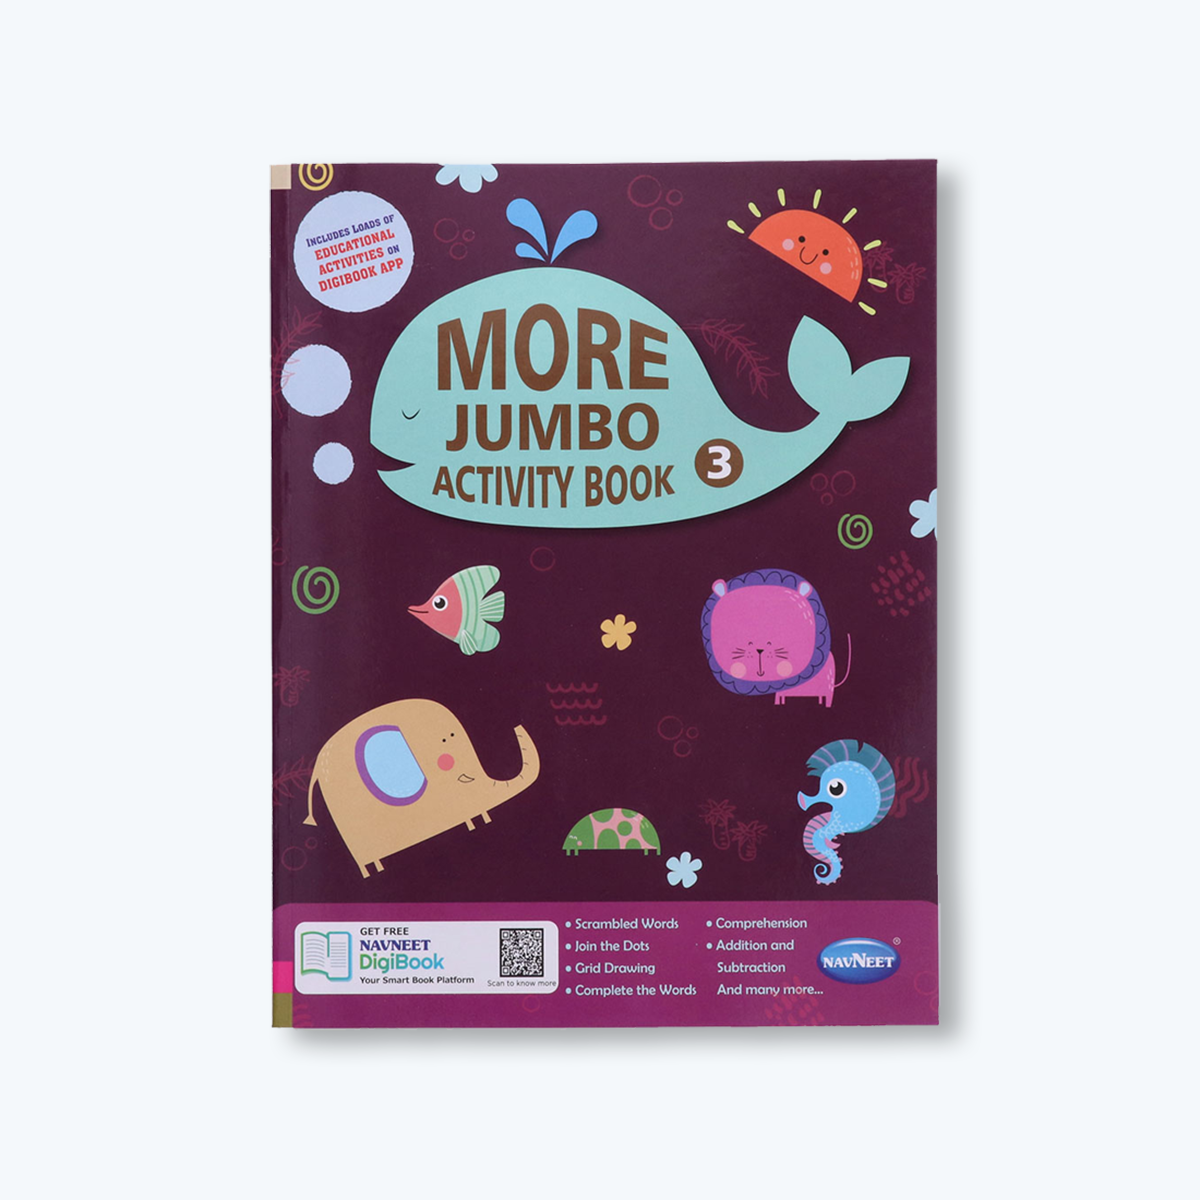 Navneet More Jumbo Activity Book 3- Fun Activities for Kids- Scrambled Words, join the dots, Grid Drawing, Complete the Words, Comprehension, Addition & Subtraction